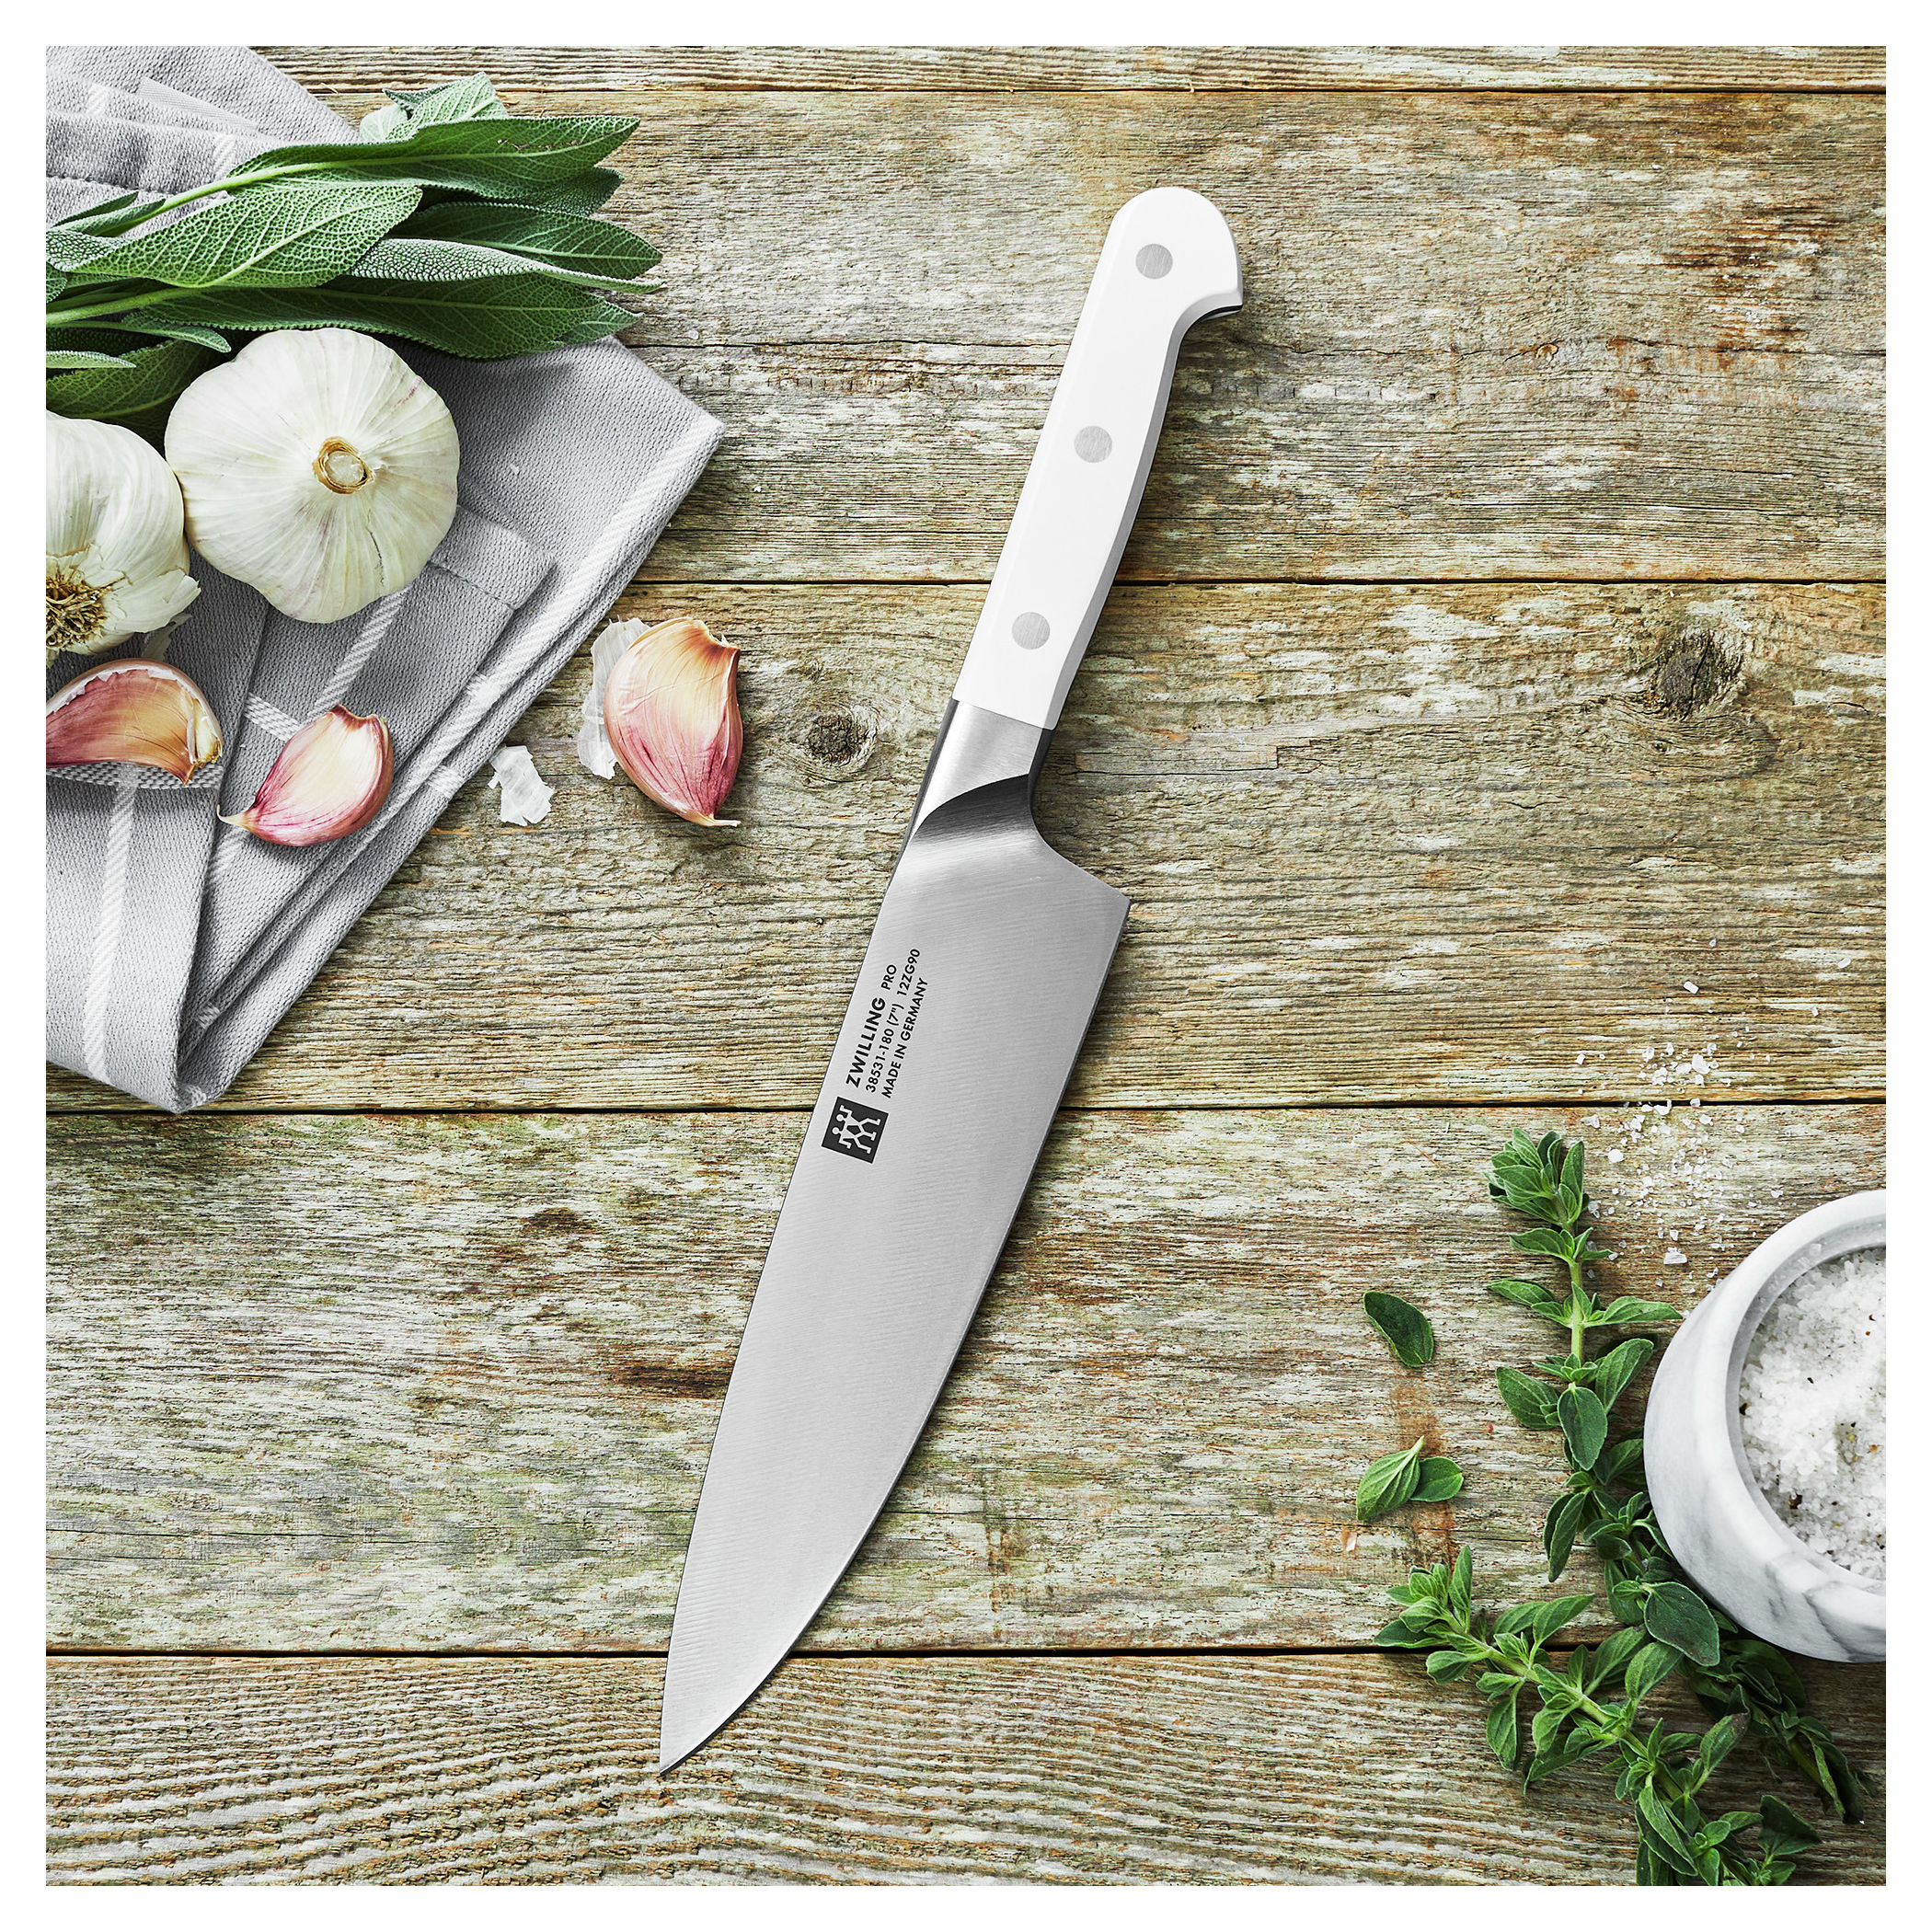 Zwilling Pro Le Blanc Slim Chef's Knife, 7